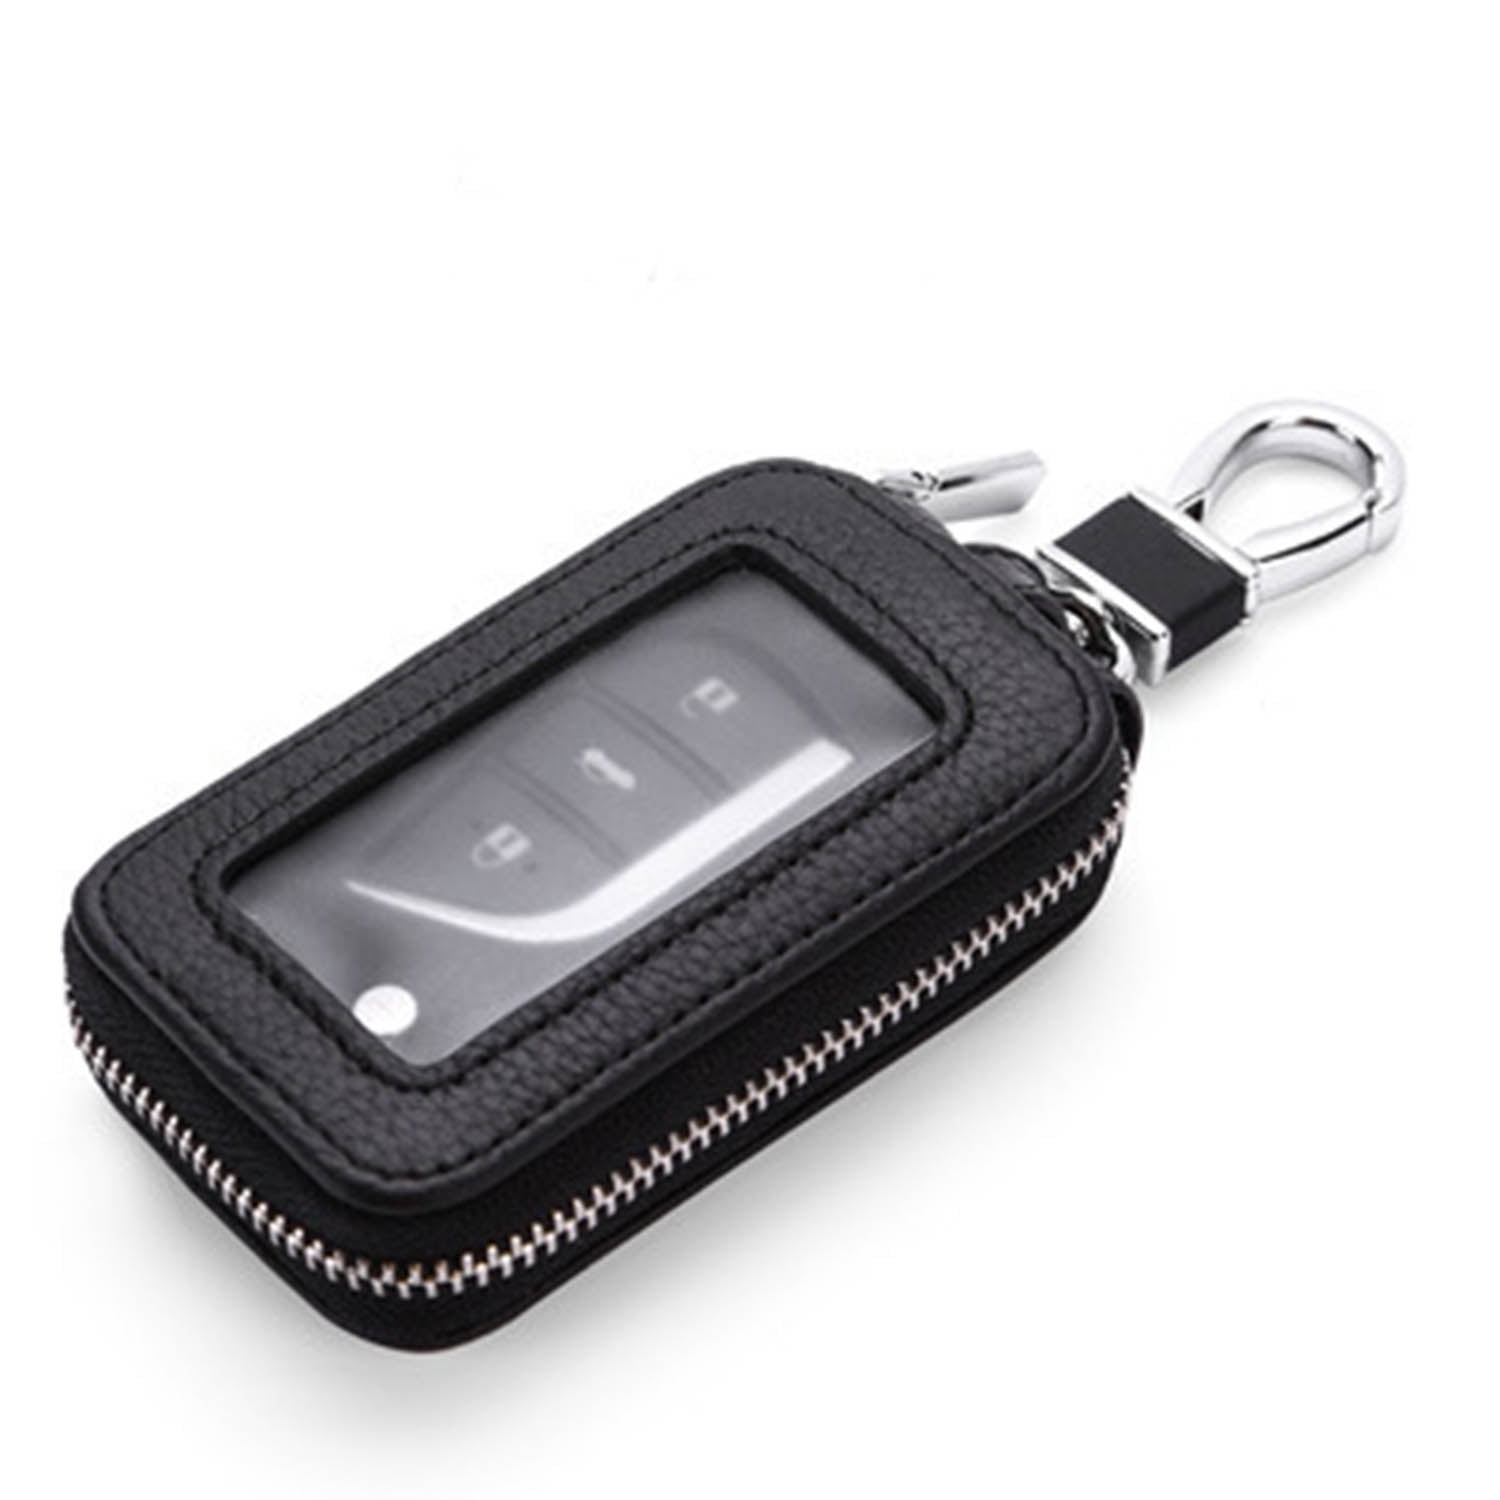 NEW Genuine Leather Universal Key Fob Holder Bag Cover Key Case For Car Auto SUV 